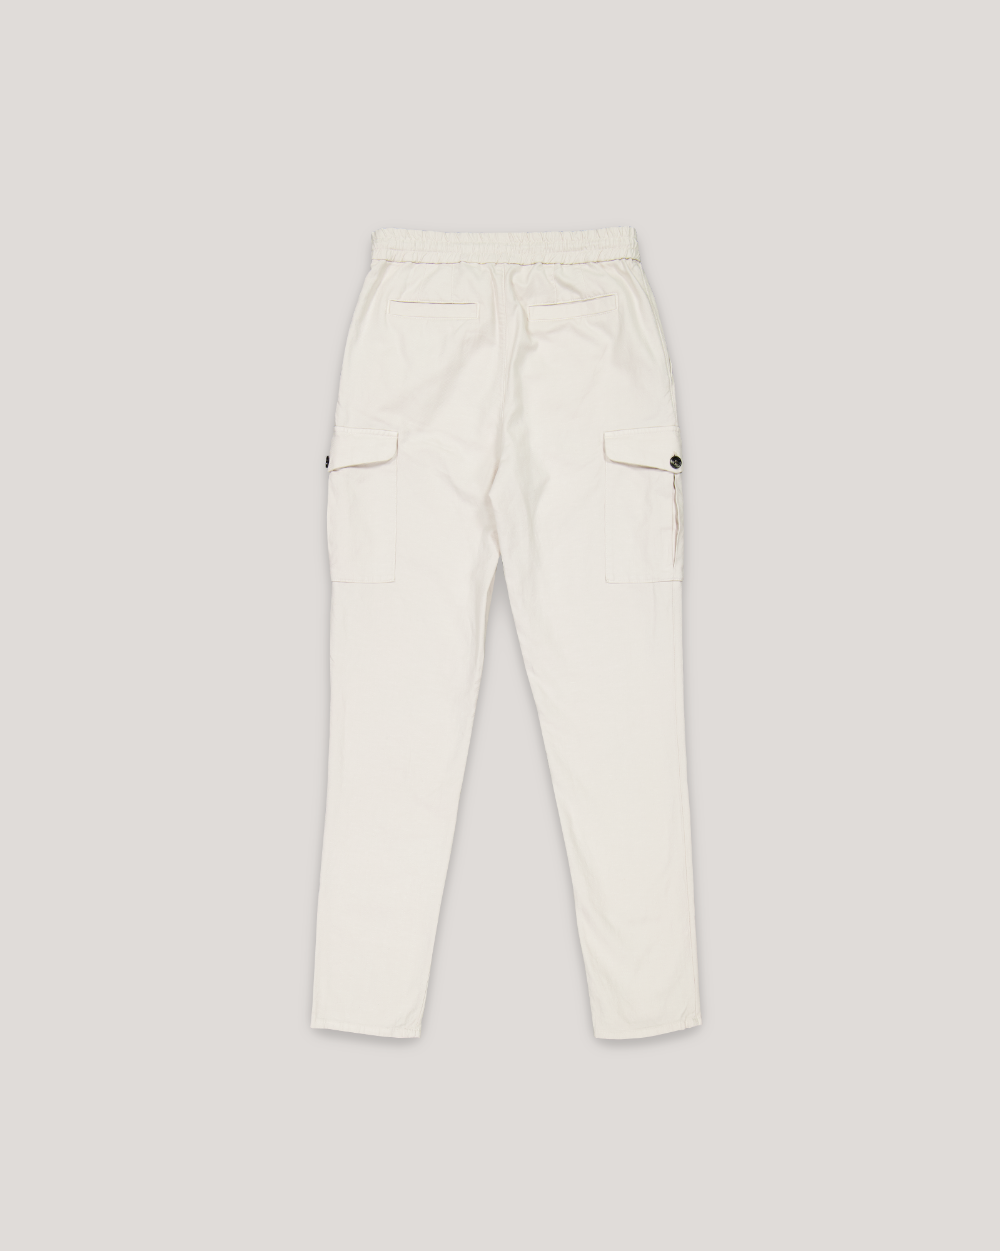 BRUNELLO CUCINELLI PLEATED DRAWSTRING TROUSER MARBLE